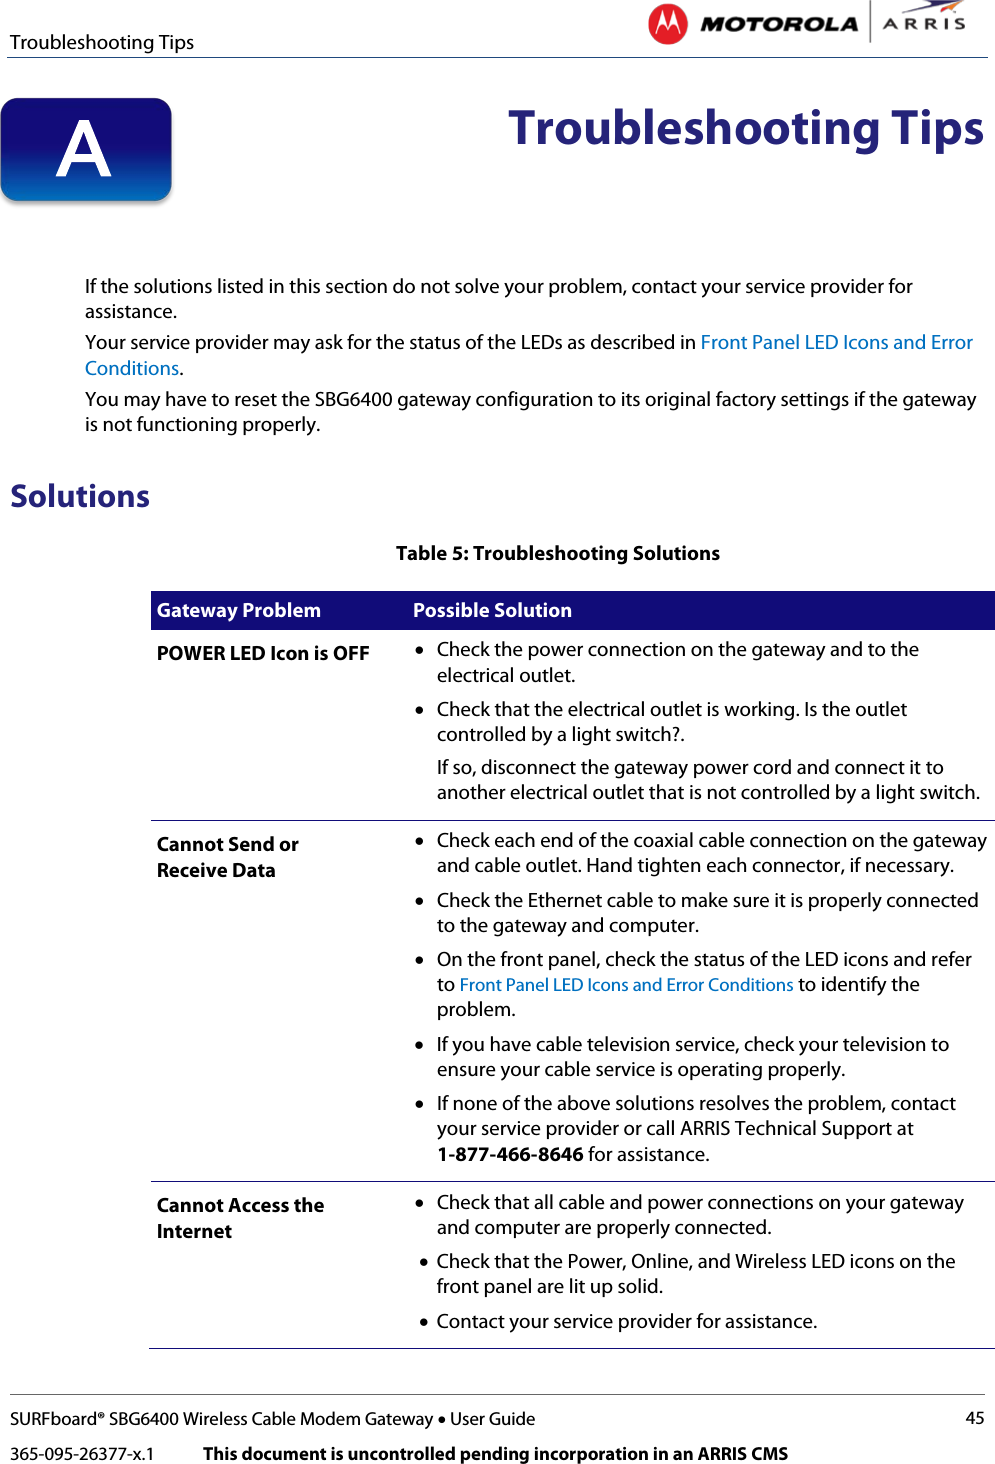 Troubleshooting Tips   SURFboard® SBG6400 Wireless Cable Modem Gateway • User Guide 45 365-095-26377-x.1            This document is uncontrolled pending incorporation in an ARRIS CMS   Troubleshooting Tips   If the solutions listed in this section do not solve your problem, contact your service provider for assistance.  Your service provider may ask for the status of the LEDs as described in Front Panel LED Icons and Error Conditions. You may have to reset the SBG6400 gateway configuration to its original factory settings if the gateway is not functioning properly.  Solutions Table 5: Troubleshooting Solutions Gateway Problem  Possible Solution POWER LED Icon is OFF • Check the power connection on the gateway and to the electrical outlet. • Check that the electrical outlet is working. Is the outlet controlled by a light switch?.  If so, disconnect the gateway power cord and connect it to another electrical outlet that is not controlled by a light switch. Cannot Send or  Receive Data • Check each end of the coaxial cable connection on the gateway and cable outlet. Hand tighten each connector, if necessary. • Check the Ethernet cable to make sure it is properly connected to the gateway and computer. • On the front panel, check the status of the LED icons and refer to Front Panel LED Icons and Error Conditions to identify the problem. • If you have cable television service, check your television to ensure your cable service is operating properly. • If none of the above solutions resolves the problem, contact your service provider or call ARRIS Technical Support at  1-877-466-8646 for assistance. Cannot Access the Internet • Check that all cable and power connections on your gateway and computer are properly connected. • Check that the Power, Online, and Wireless LED icons on the front panel are lit up solid. • Contact your service provider for assistance. A 